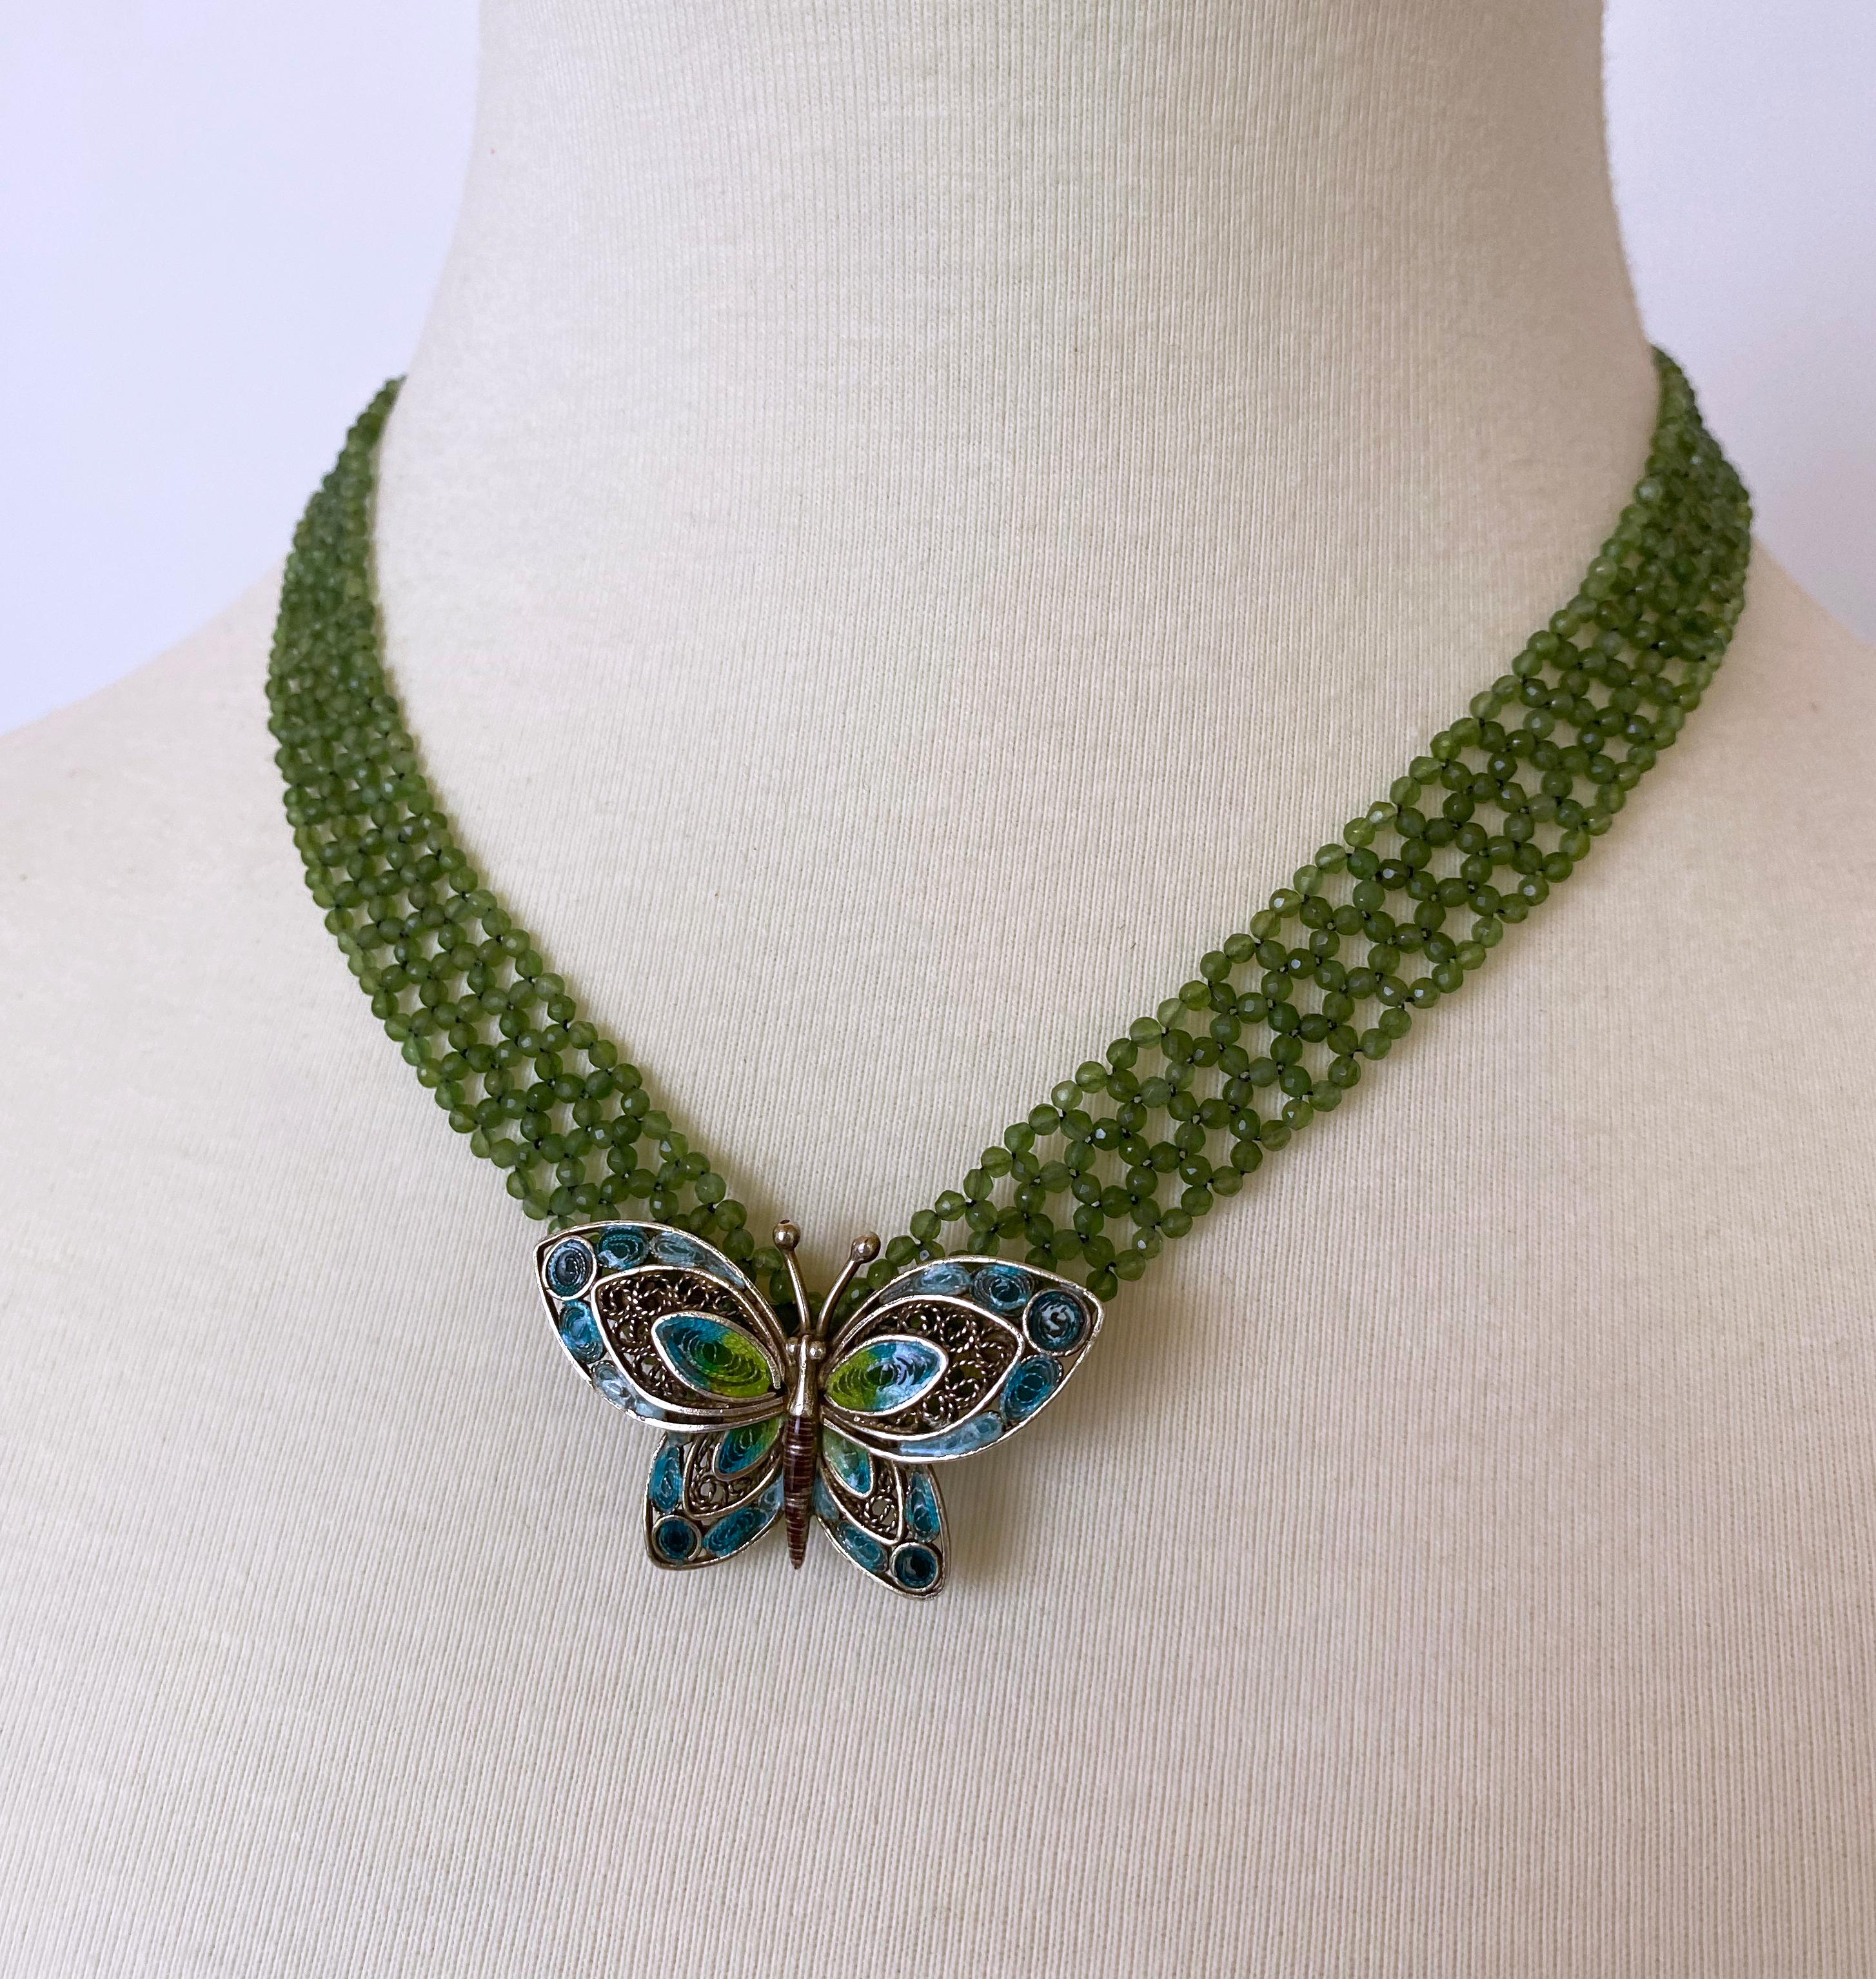 Beautiful stone necklace by Marina J. This lovely V Necklace is made using all faceted Peridot stones woven together into a fine lace like design. The small Peridots display a beautiful hue of medium green and their translucency allow them to